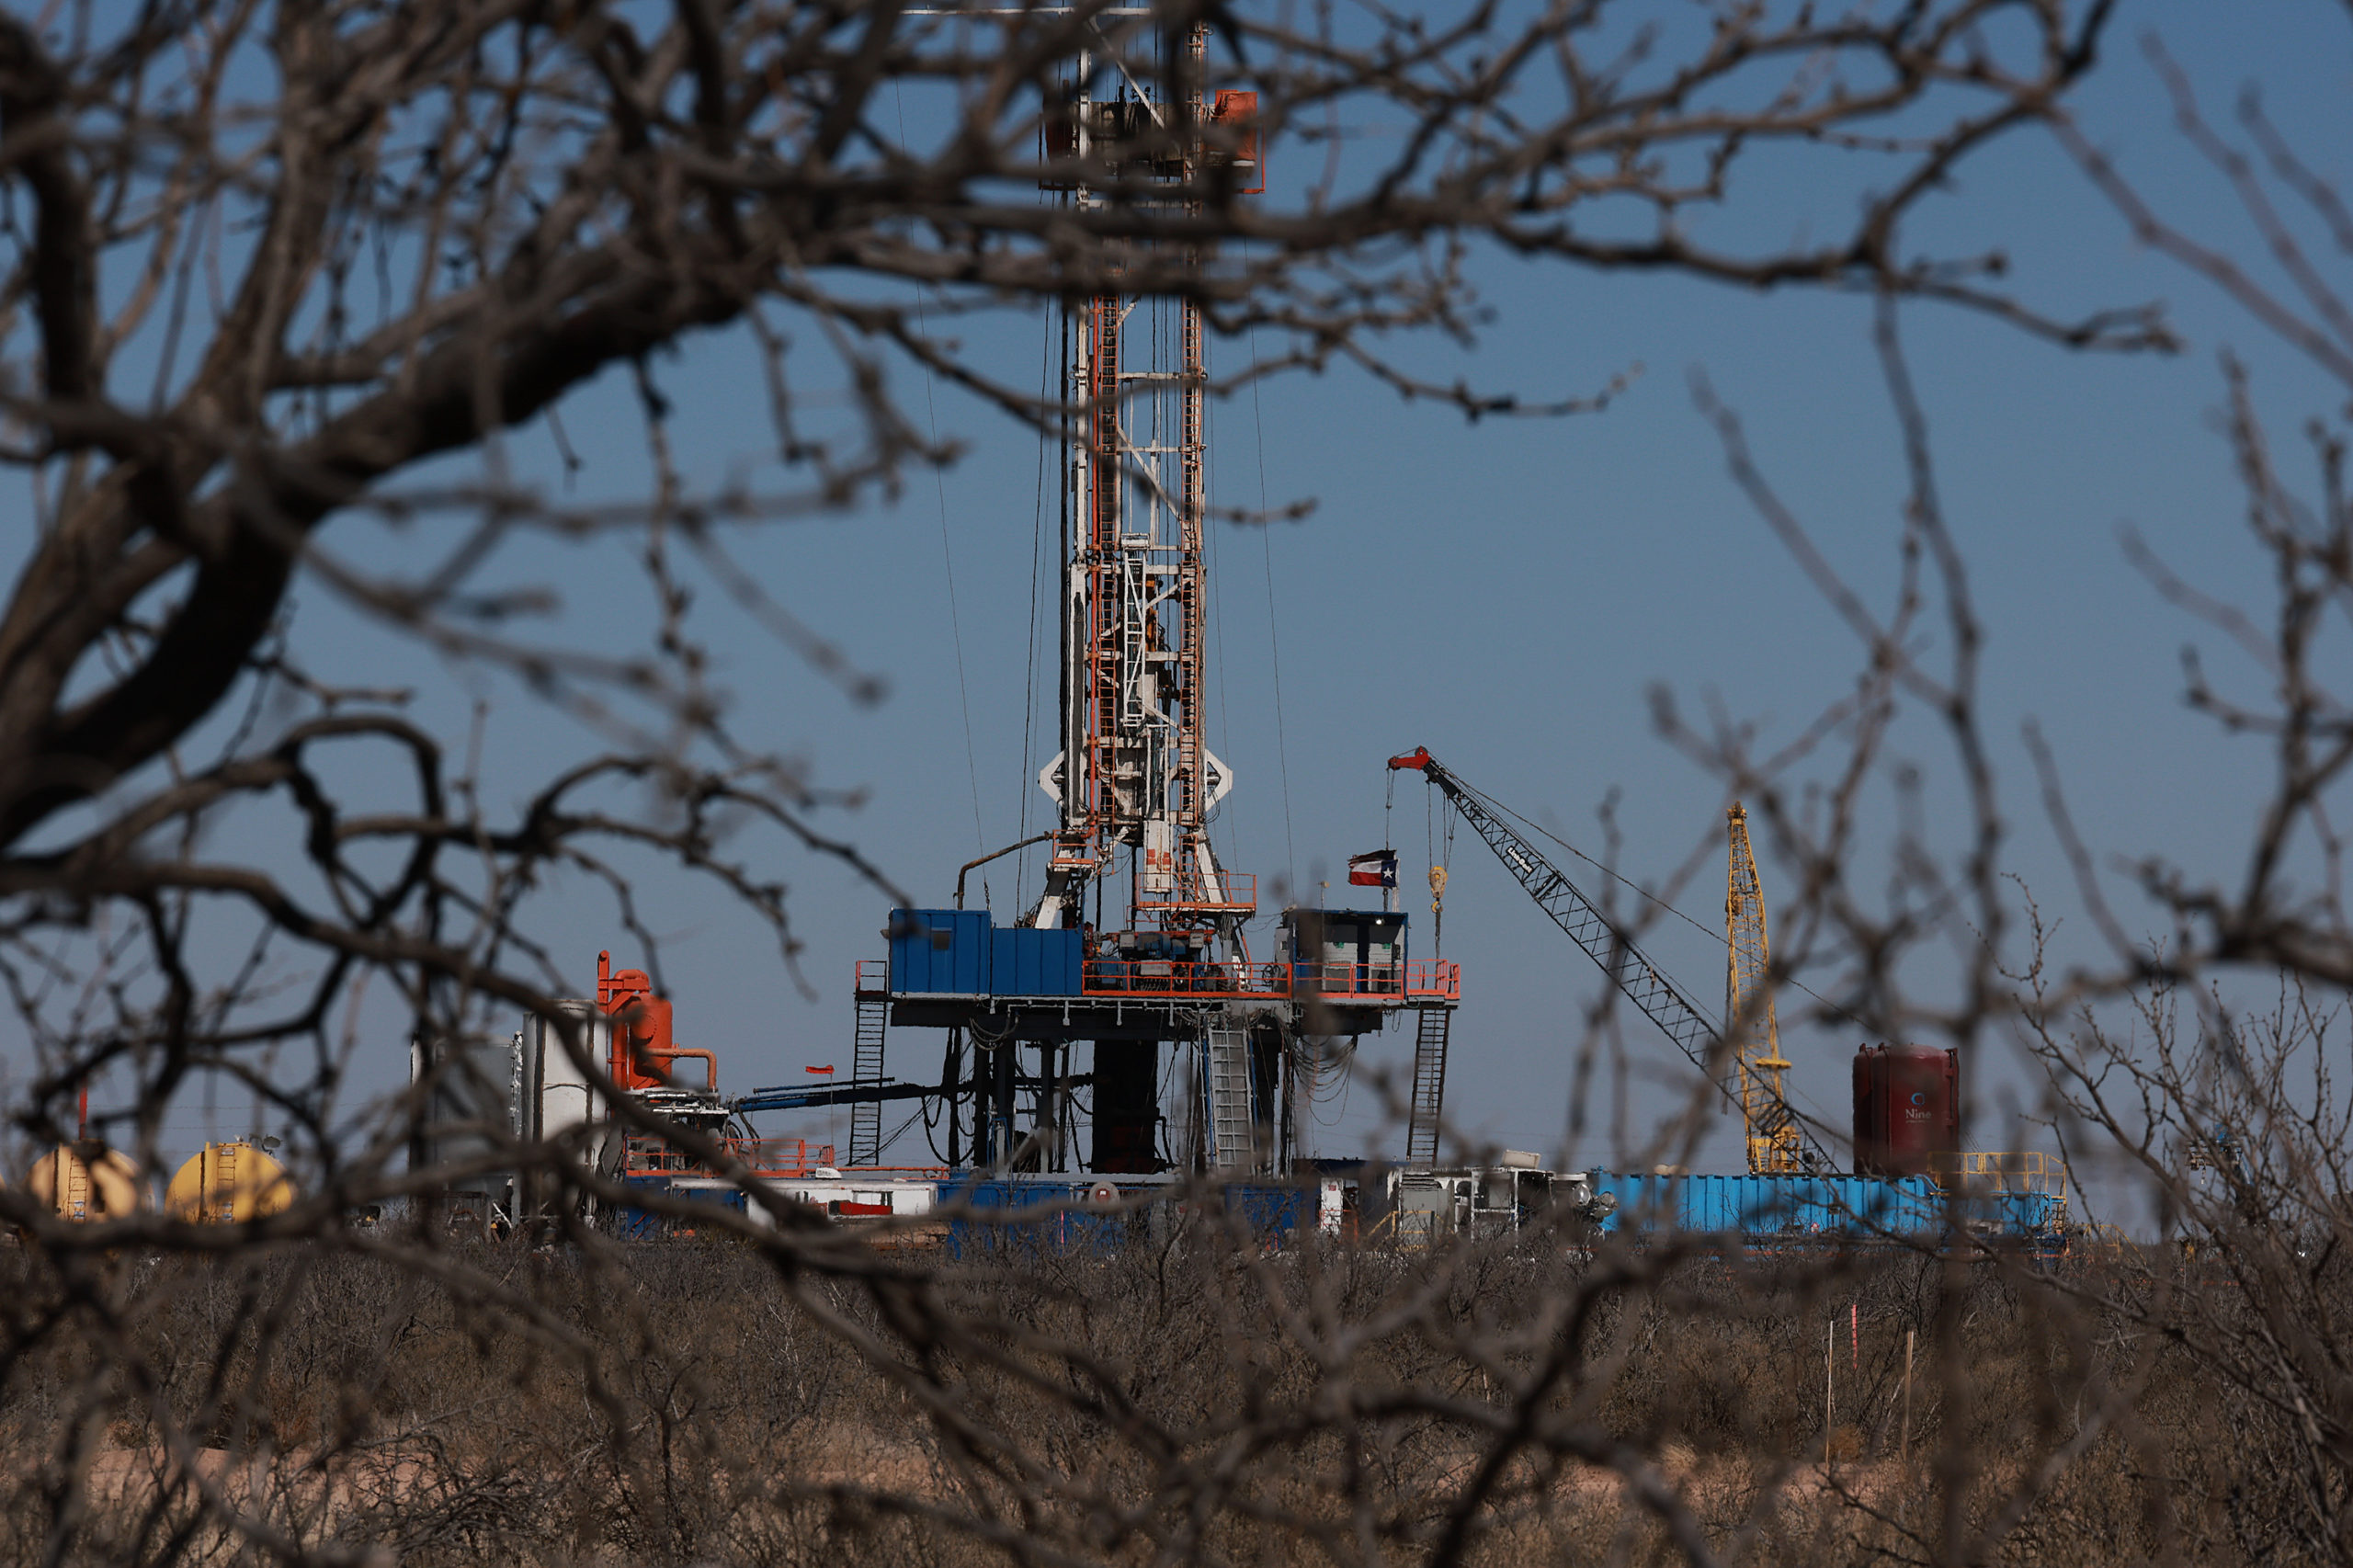 An oil drilling rig works in the Permian Basin oil field on March 13 in Midland, Texas. (Joe Raedle/Getty Images)